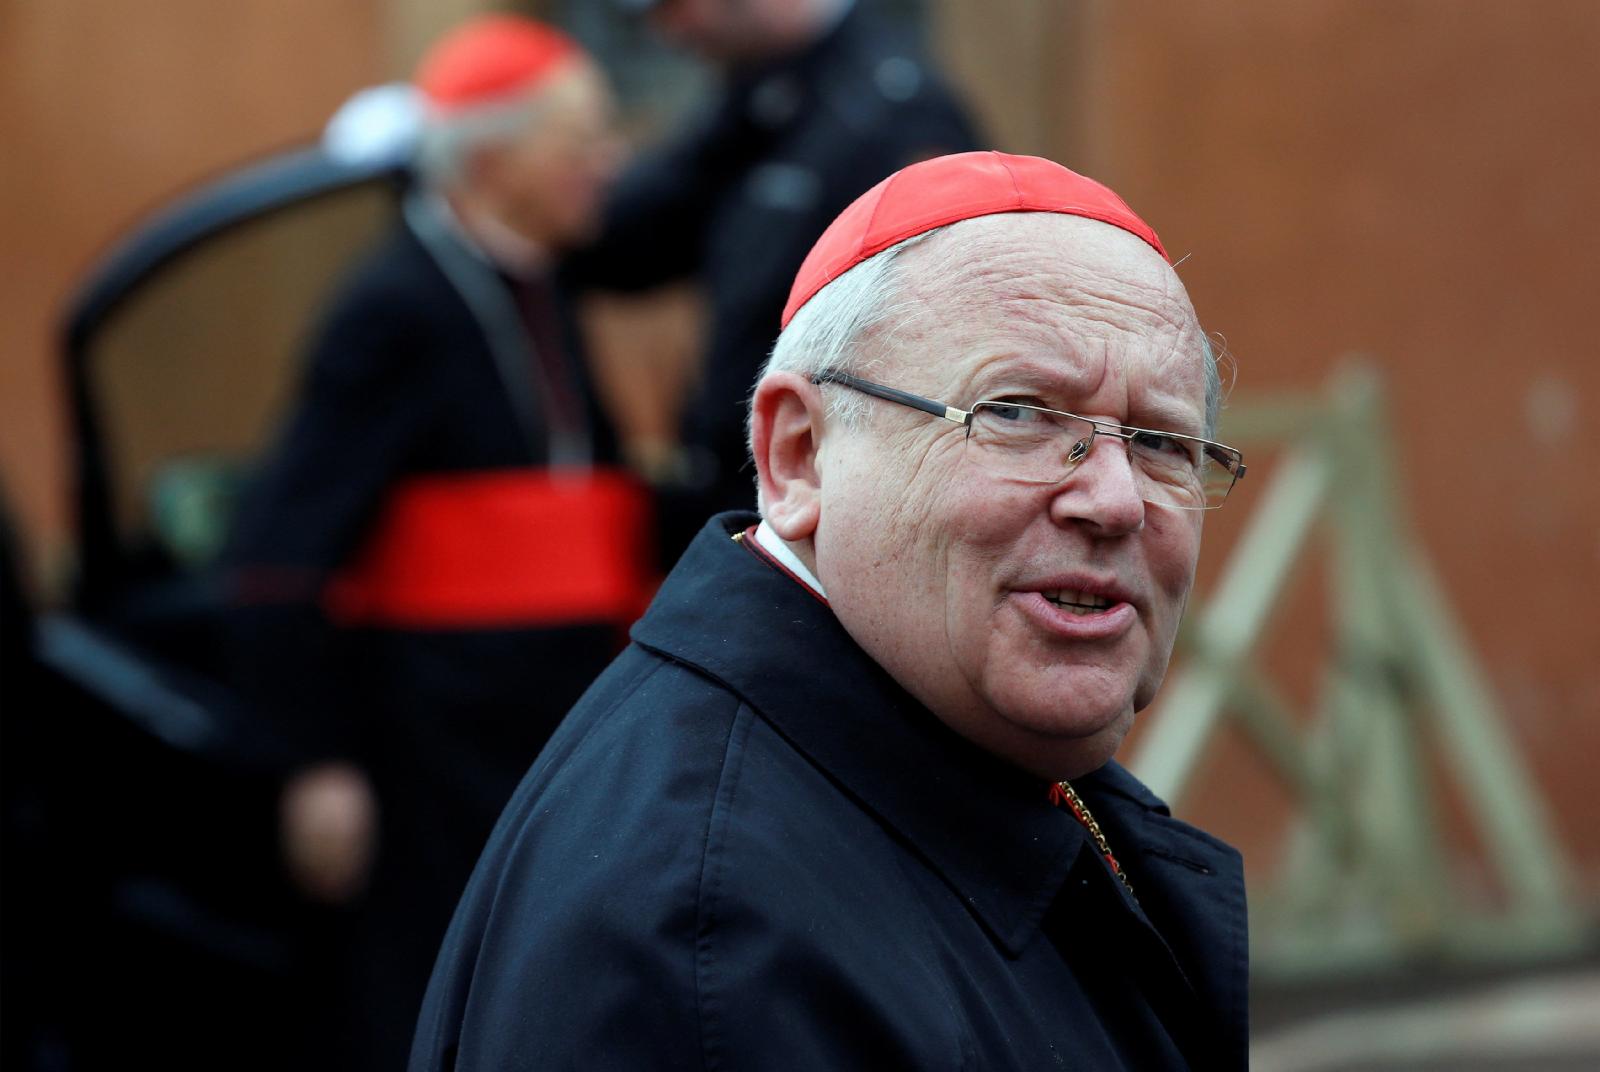 French Church and Vatican agree bishops' abuse cases mishandled